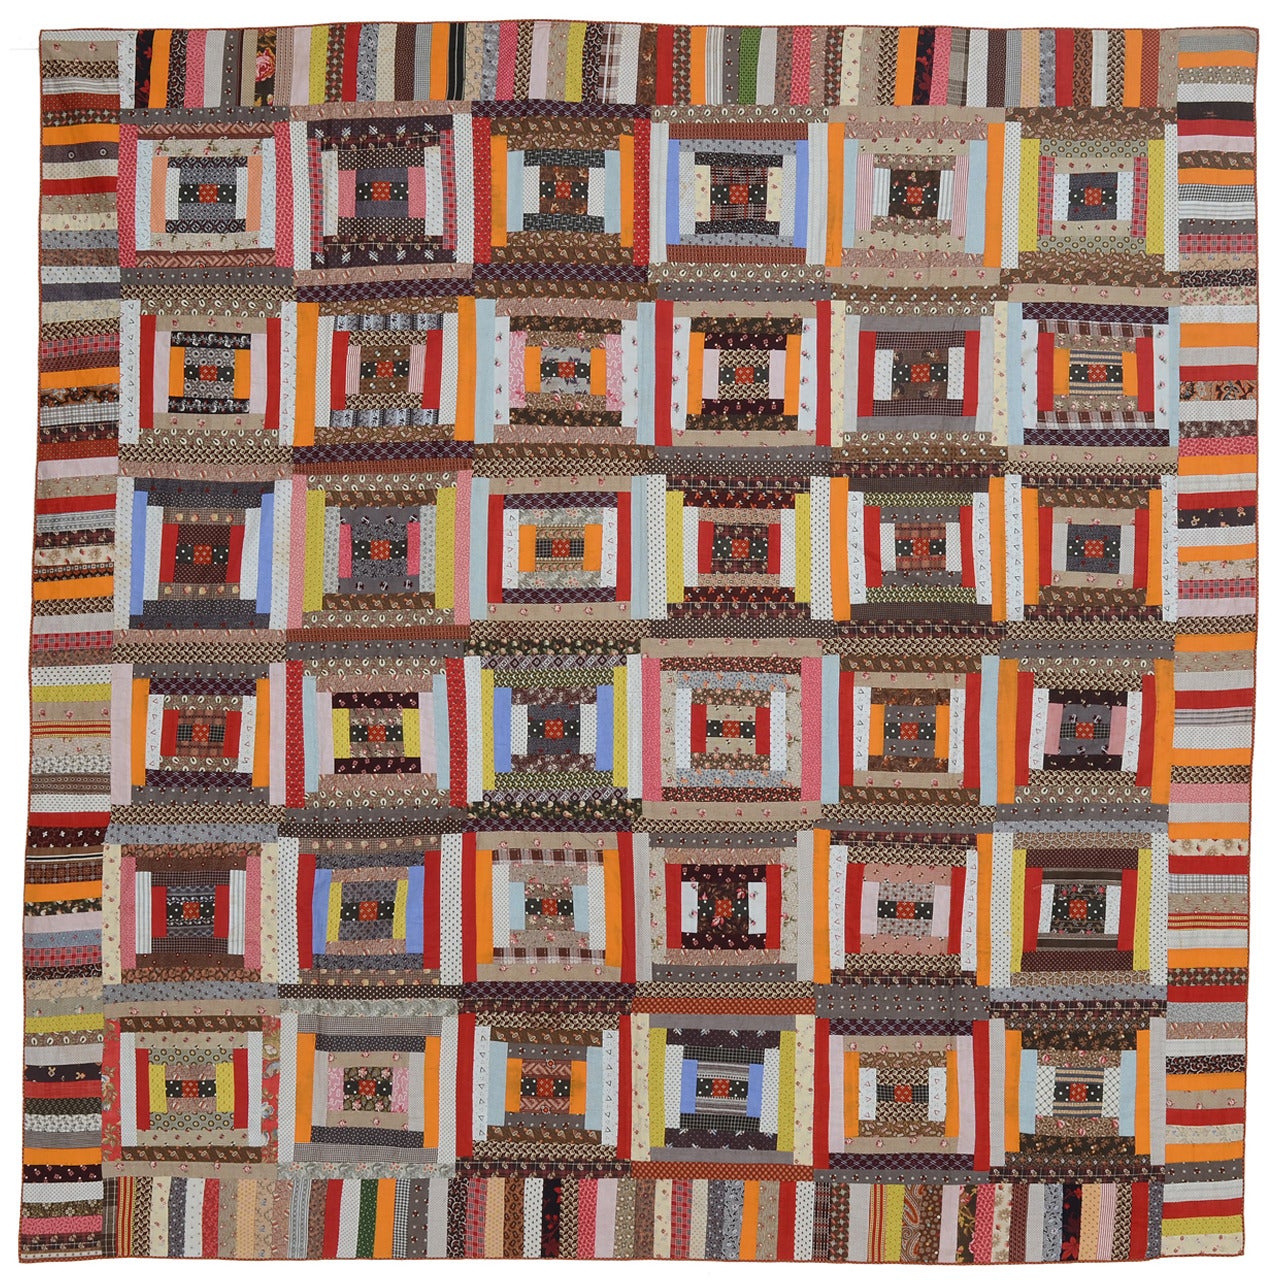 Courthouse Steps Log Cabin Quilt